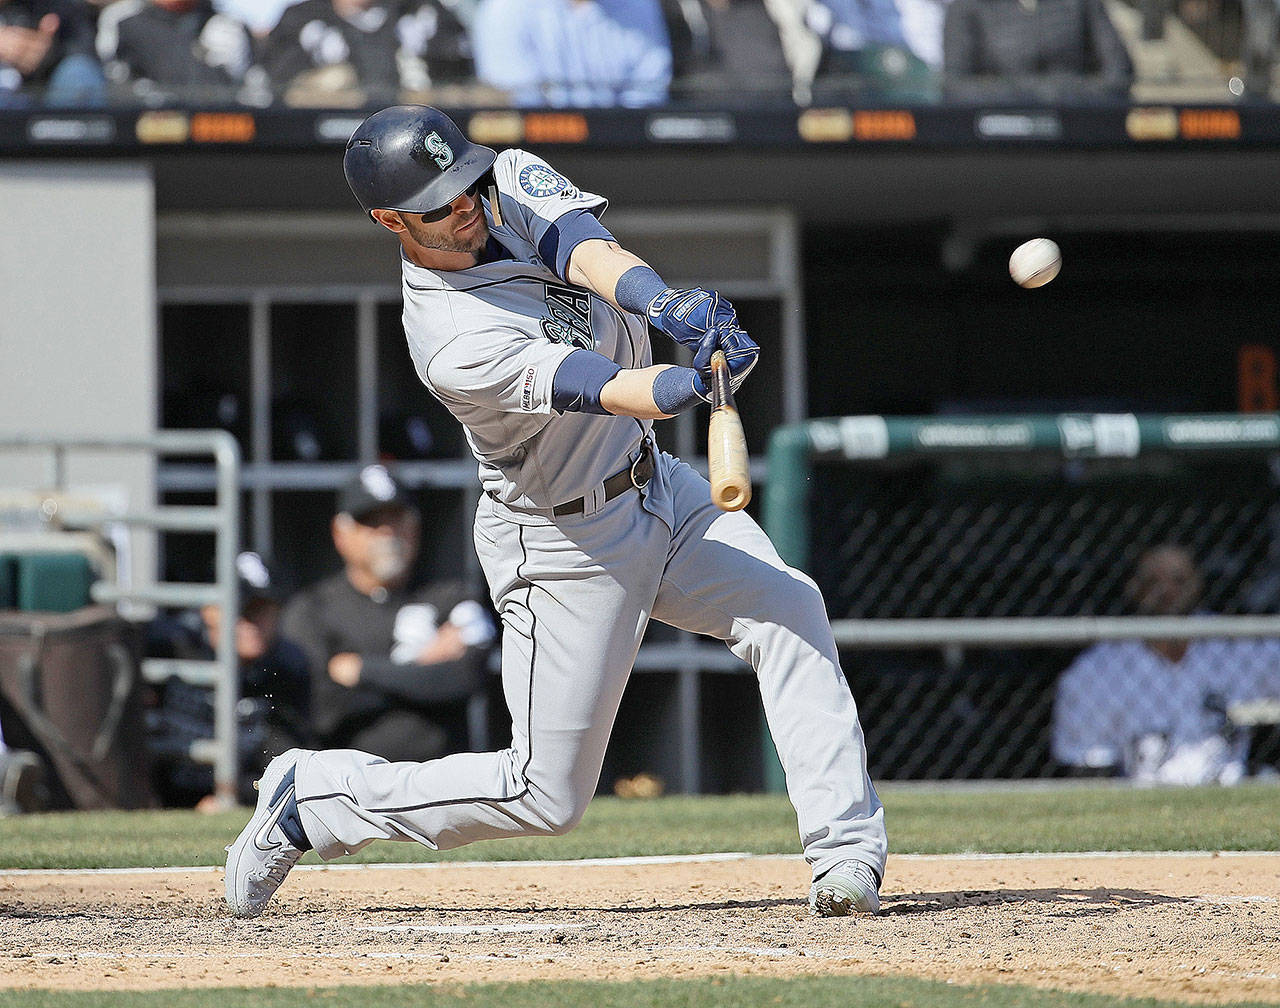 The Seattle Mariners’ Mitch Haniger hits a two-run home run in the sixth inning against the Chicago White Sox at Guaranteed Rate Field in Chicago on Friday, April 5, 2019. The White Sox won, 10-8. (Jonathan Daniel/Getty Images/TNS)